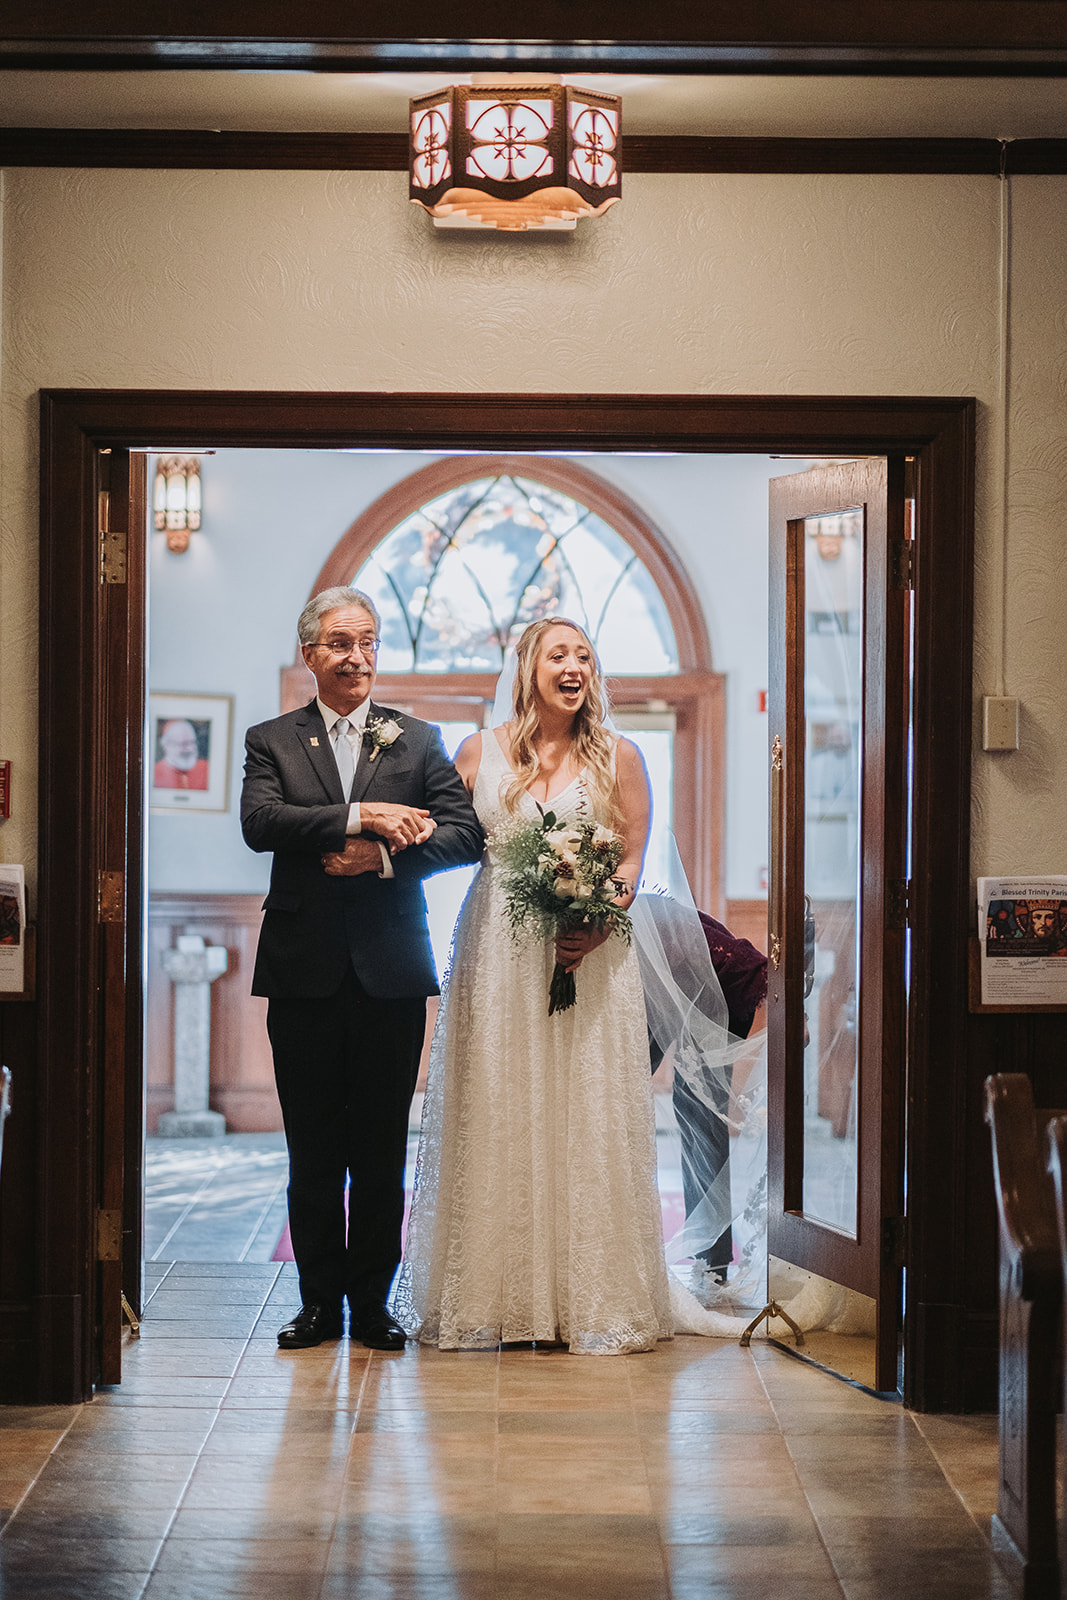 Father walking daughter down the isle to the groom.